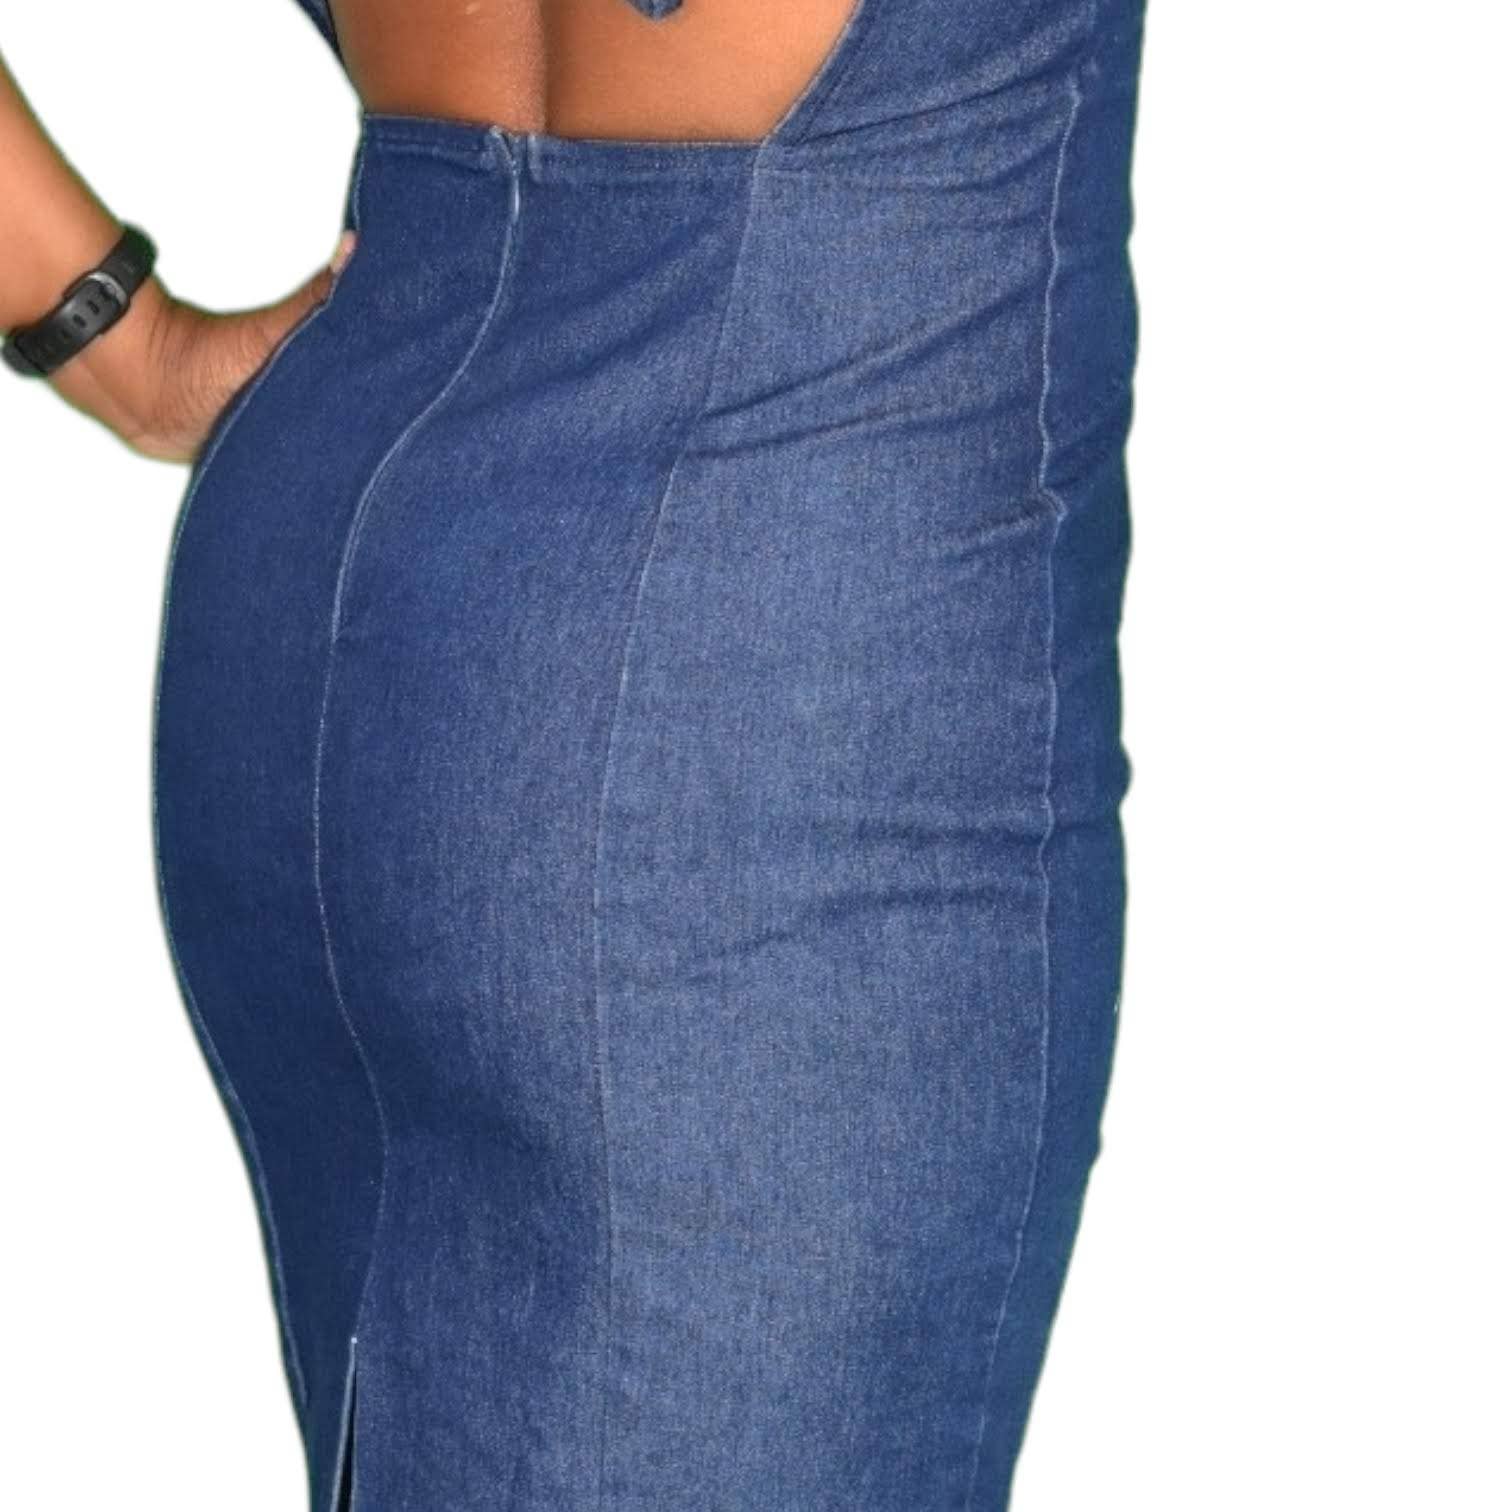 Vintage Guess Denim Dress Blue Jean Bodycon Pencil Halter Low Back Ties Size Small